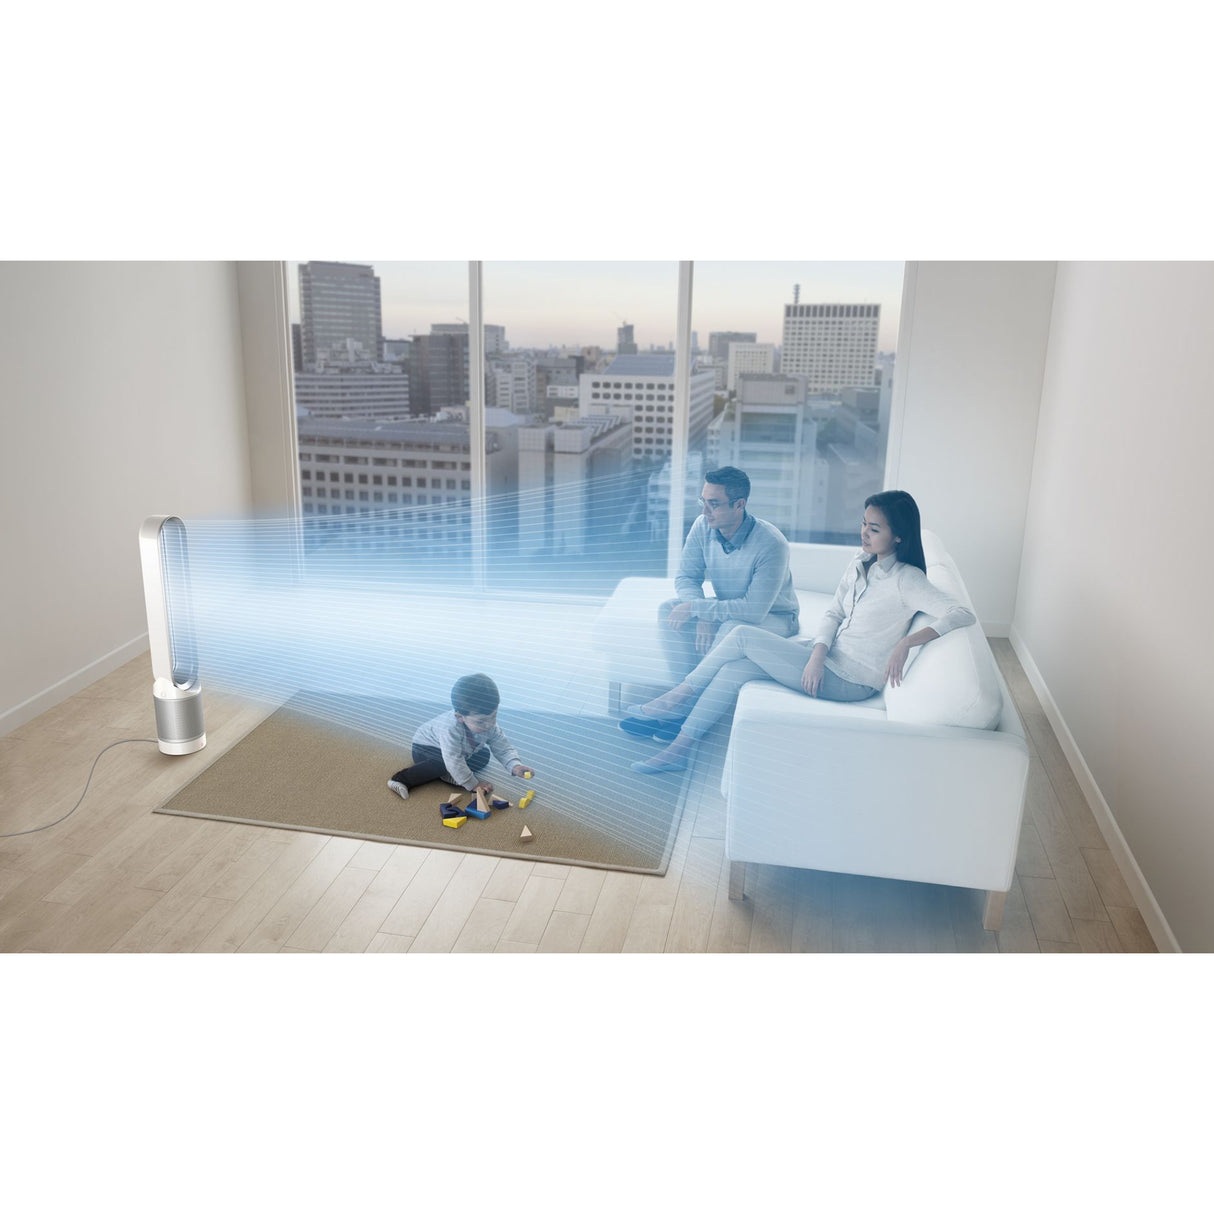 Dyson TP03 - Cool Link Tower Air Purifier (White/Silver)